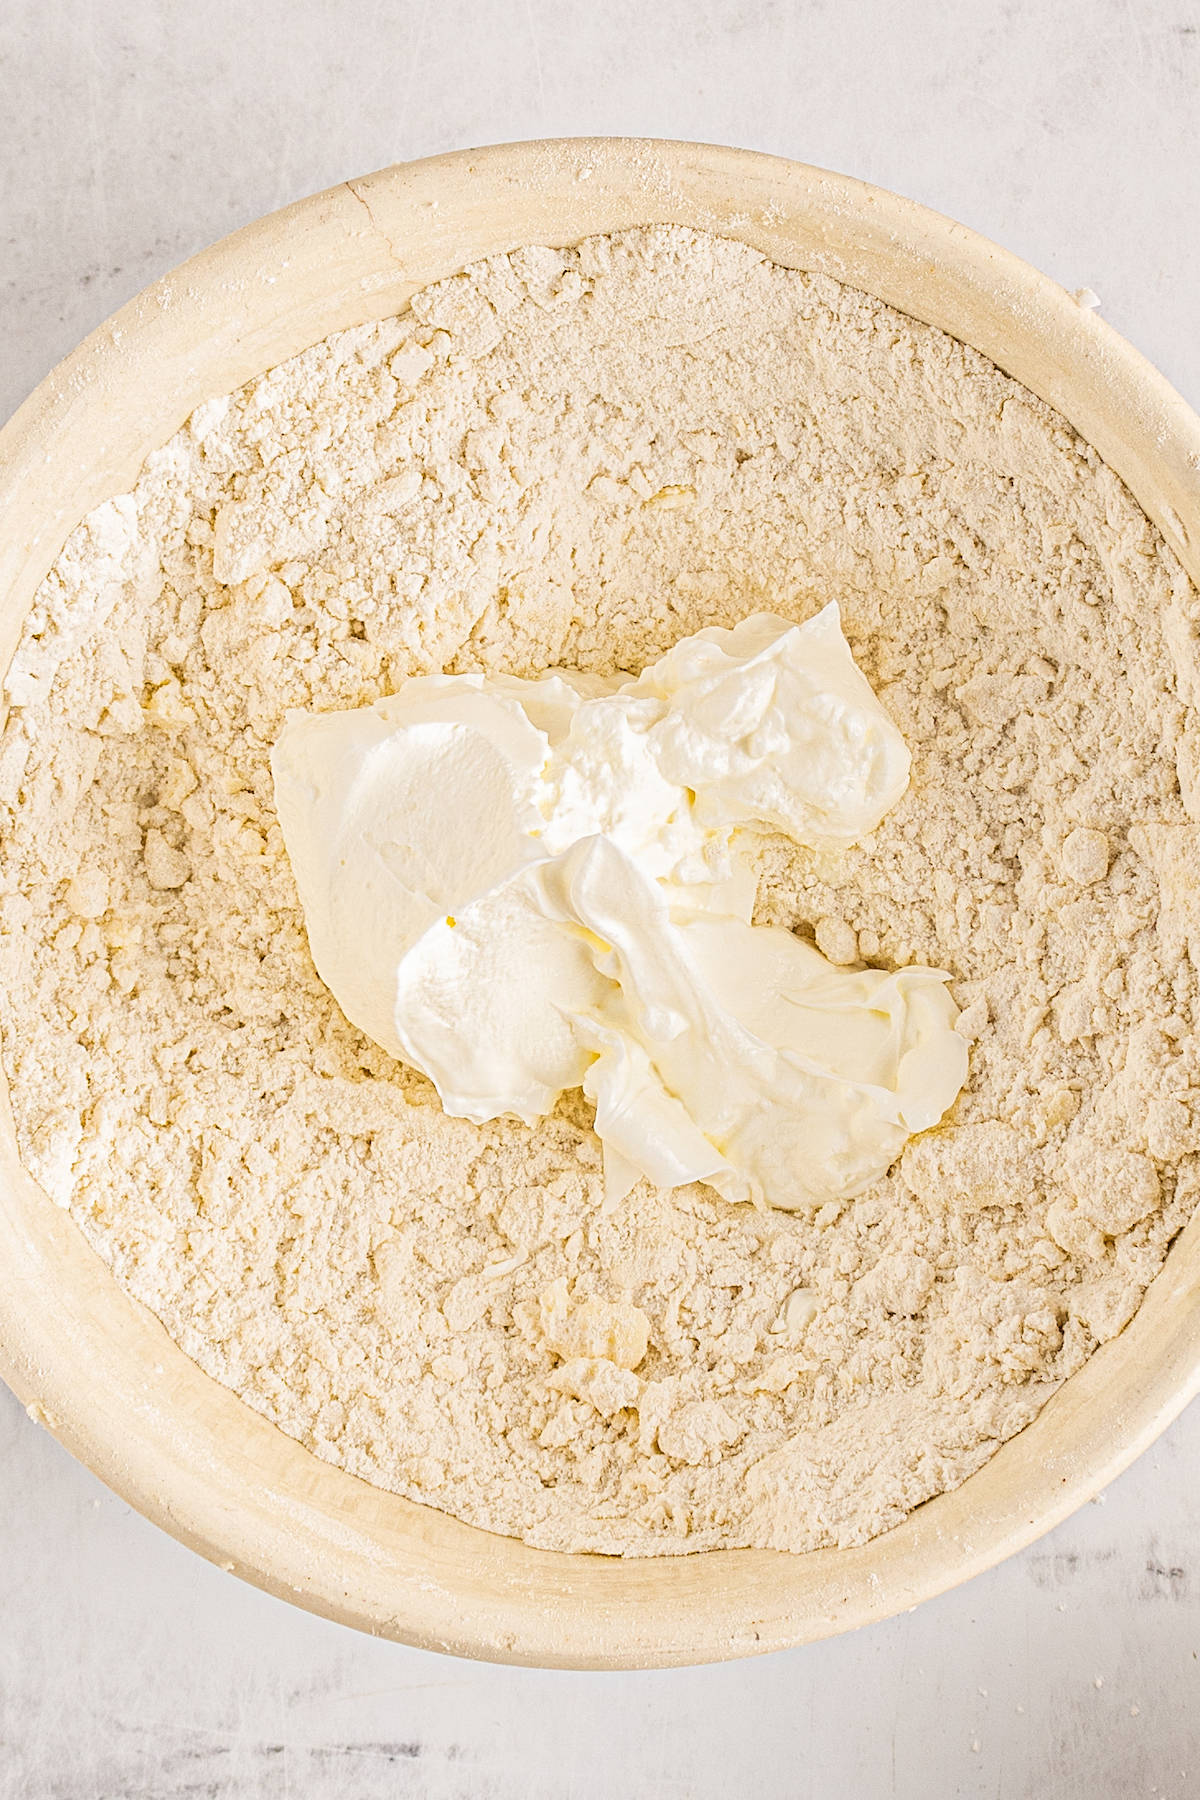 Sour cream in a bowl of dry baking ingredients.